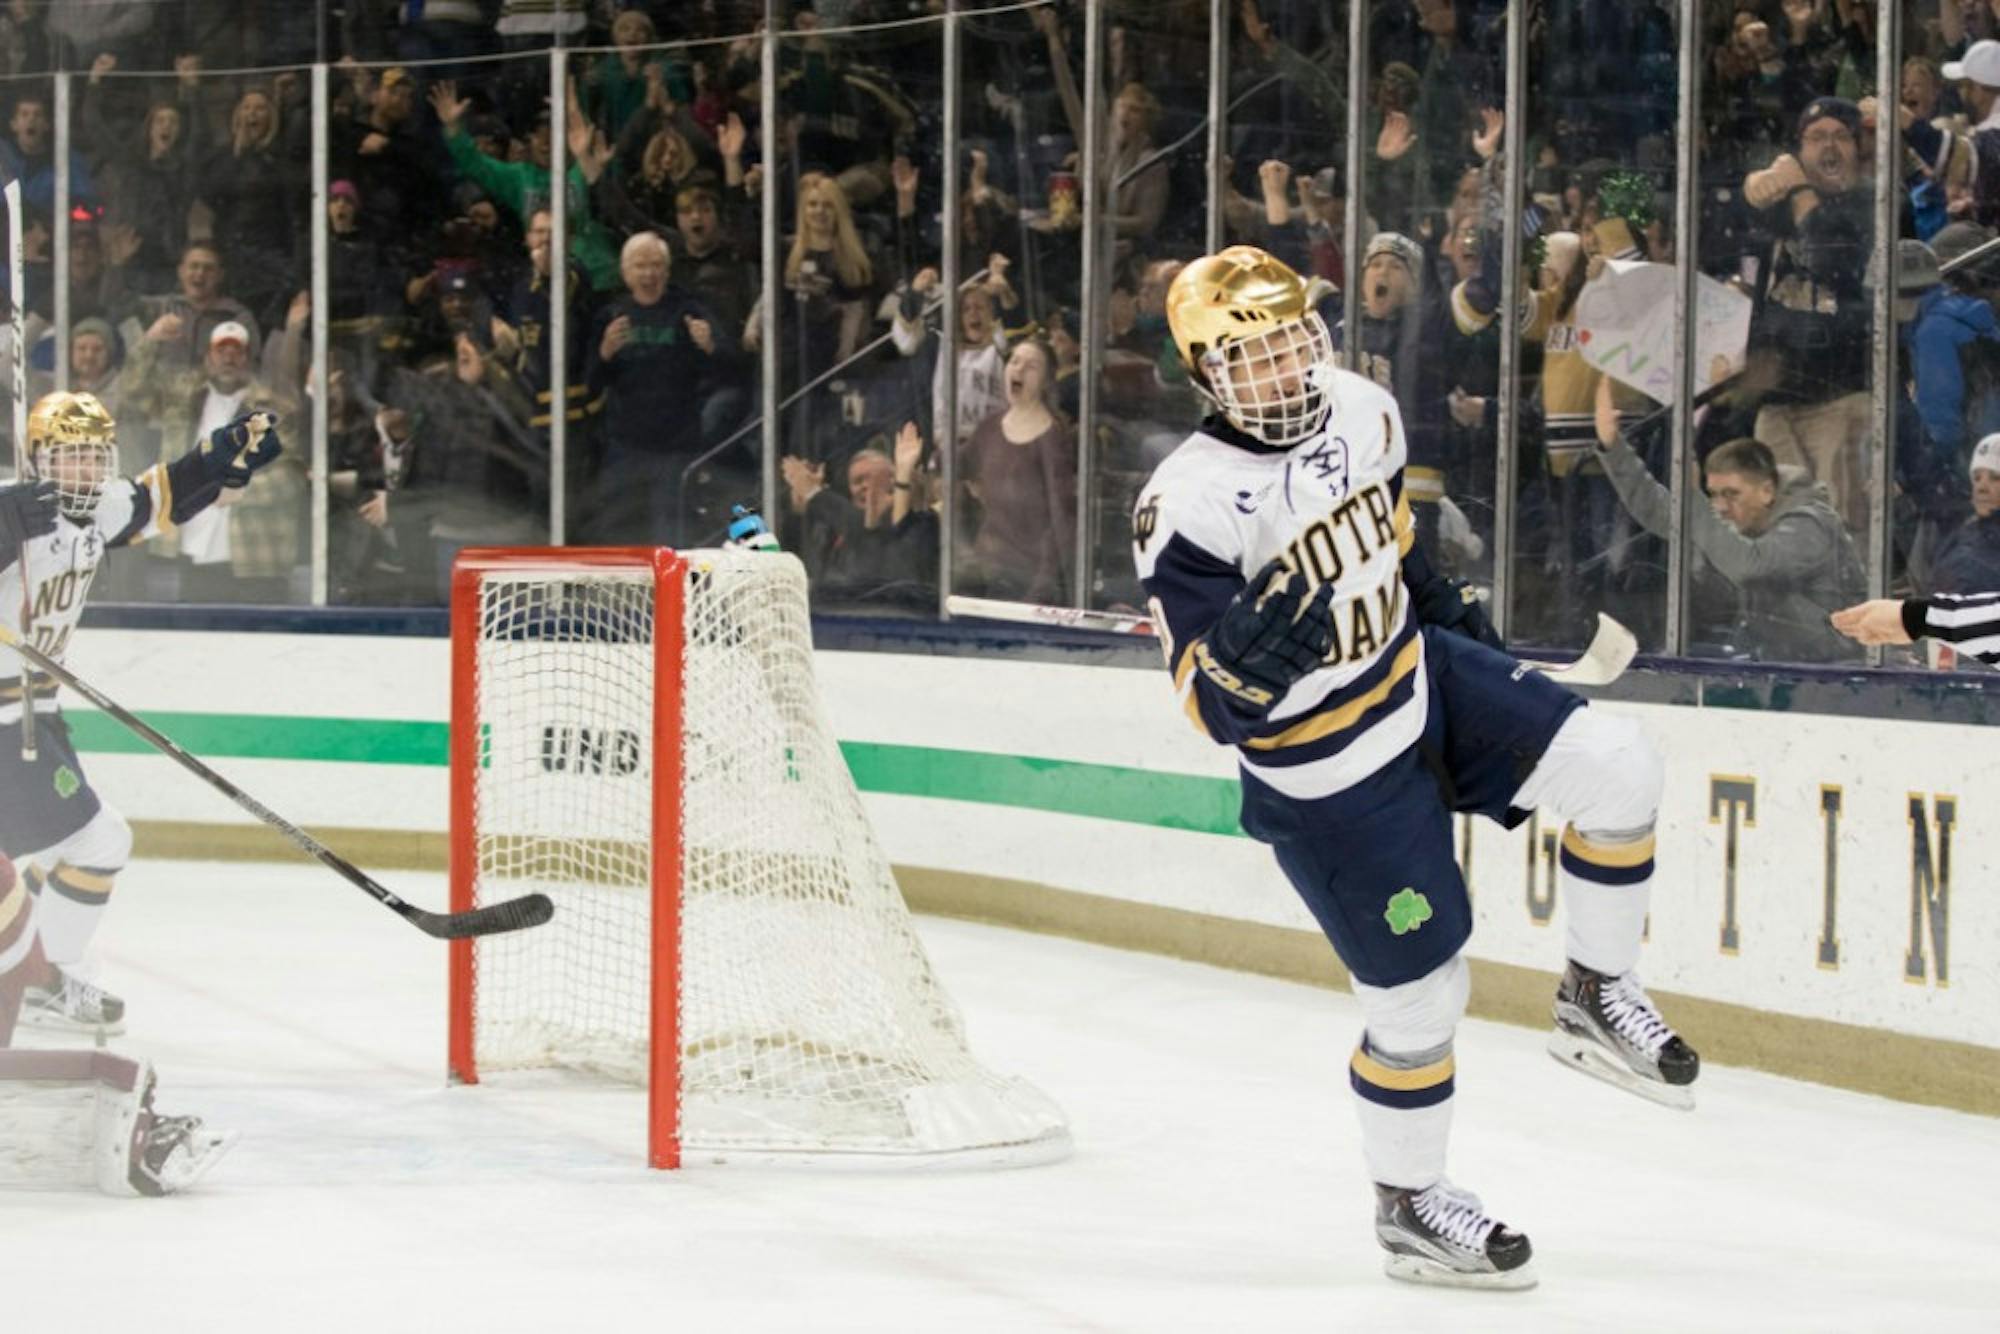 Irish junior forward Anders Bjork celebrates his game-winning goal in the second period of No. 14 Notre Dame's 3-2 upset of rival No. 4 Boston College at Compton Family Ice Arena on Saturday night.